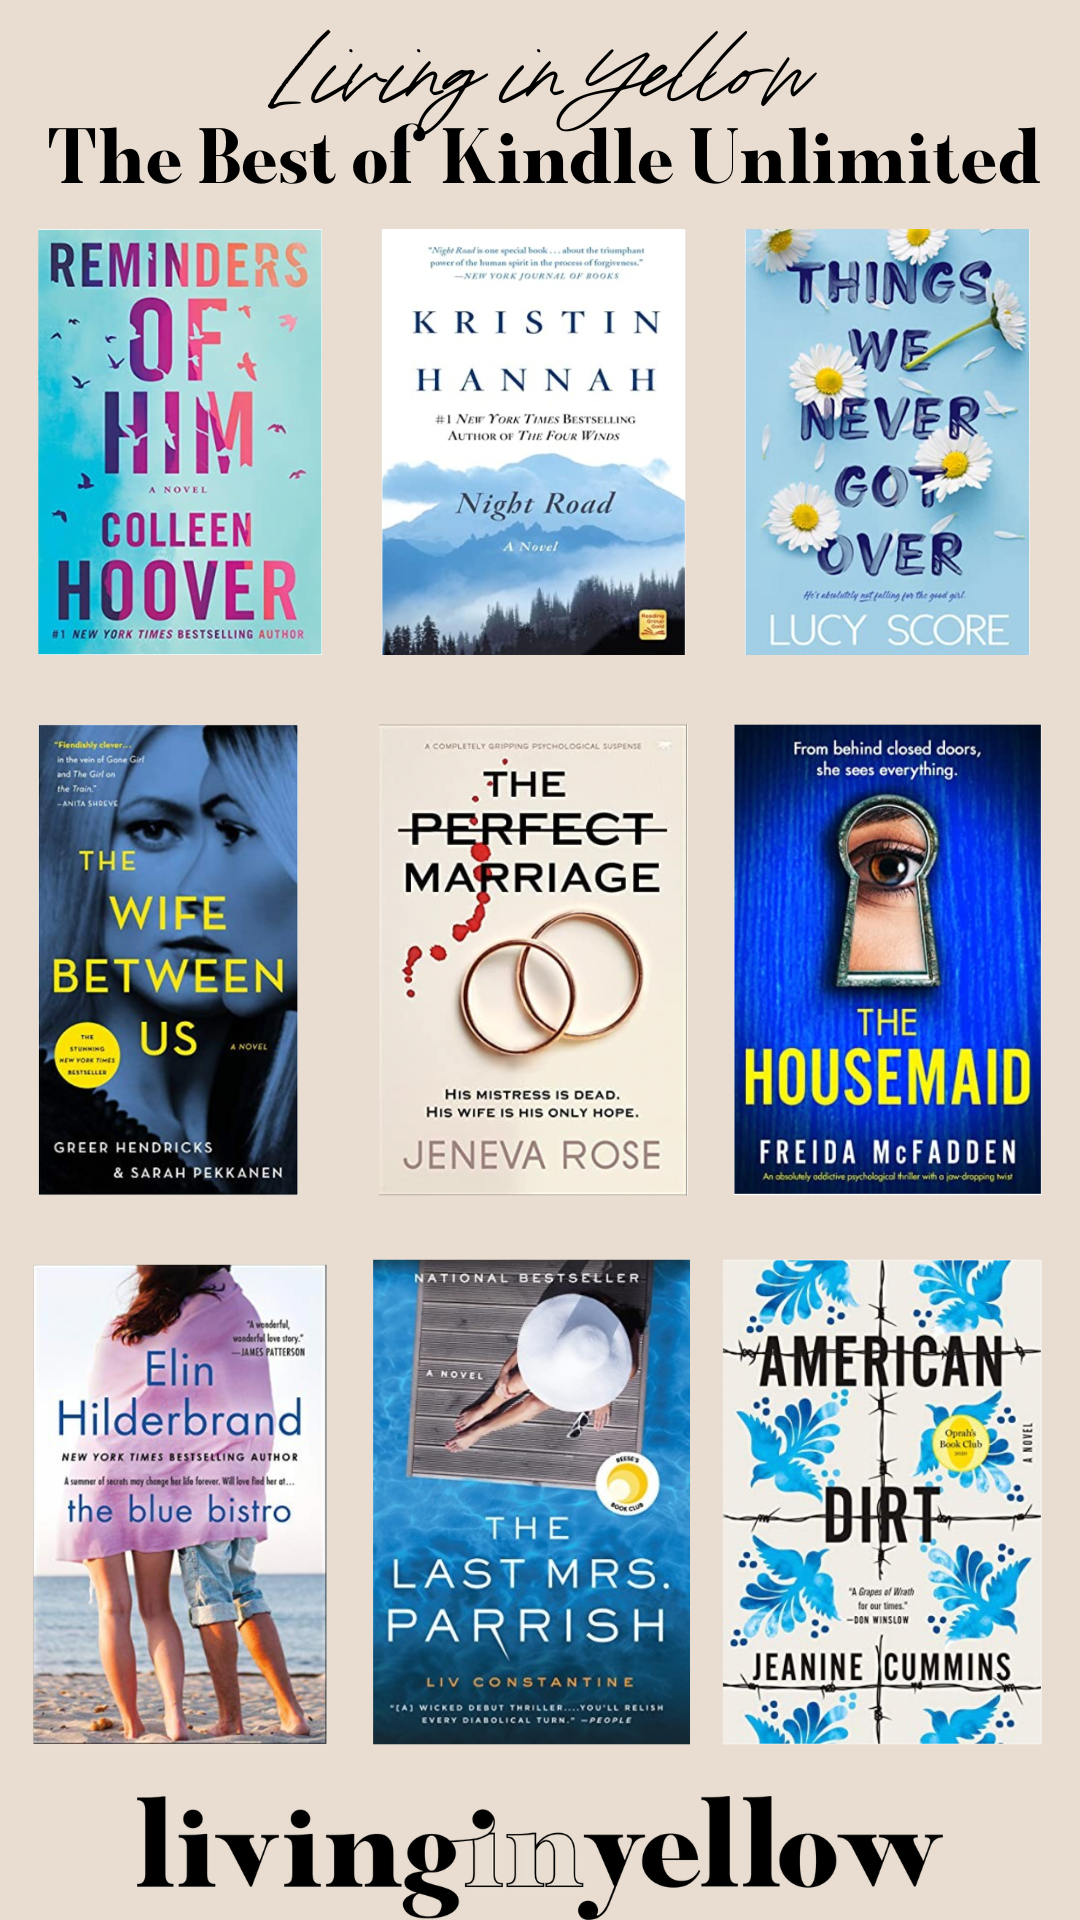 The Best Kindle Unlimited Books (For All Ages) - Some the Wiser